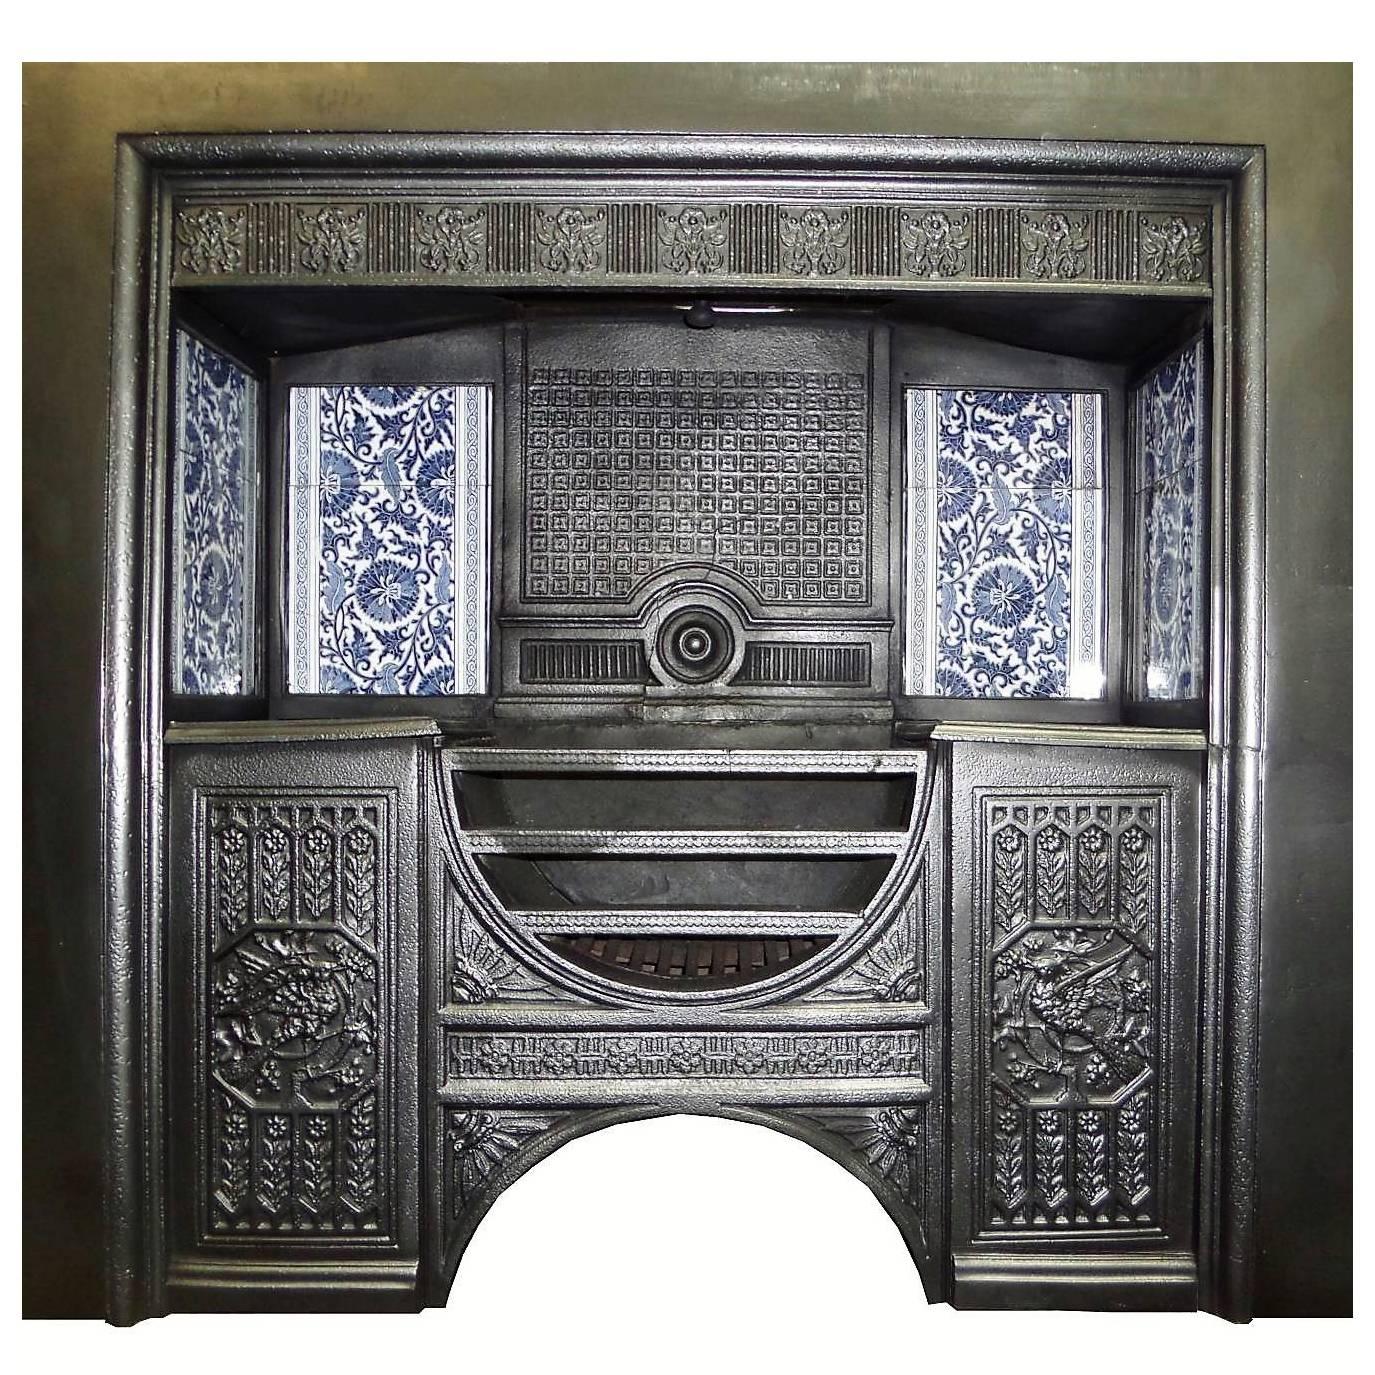 19th Century Victorian Hob Grate Fire Insert with William Morris Original Tiles For Sale